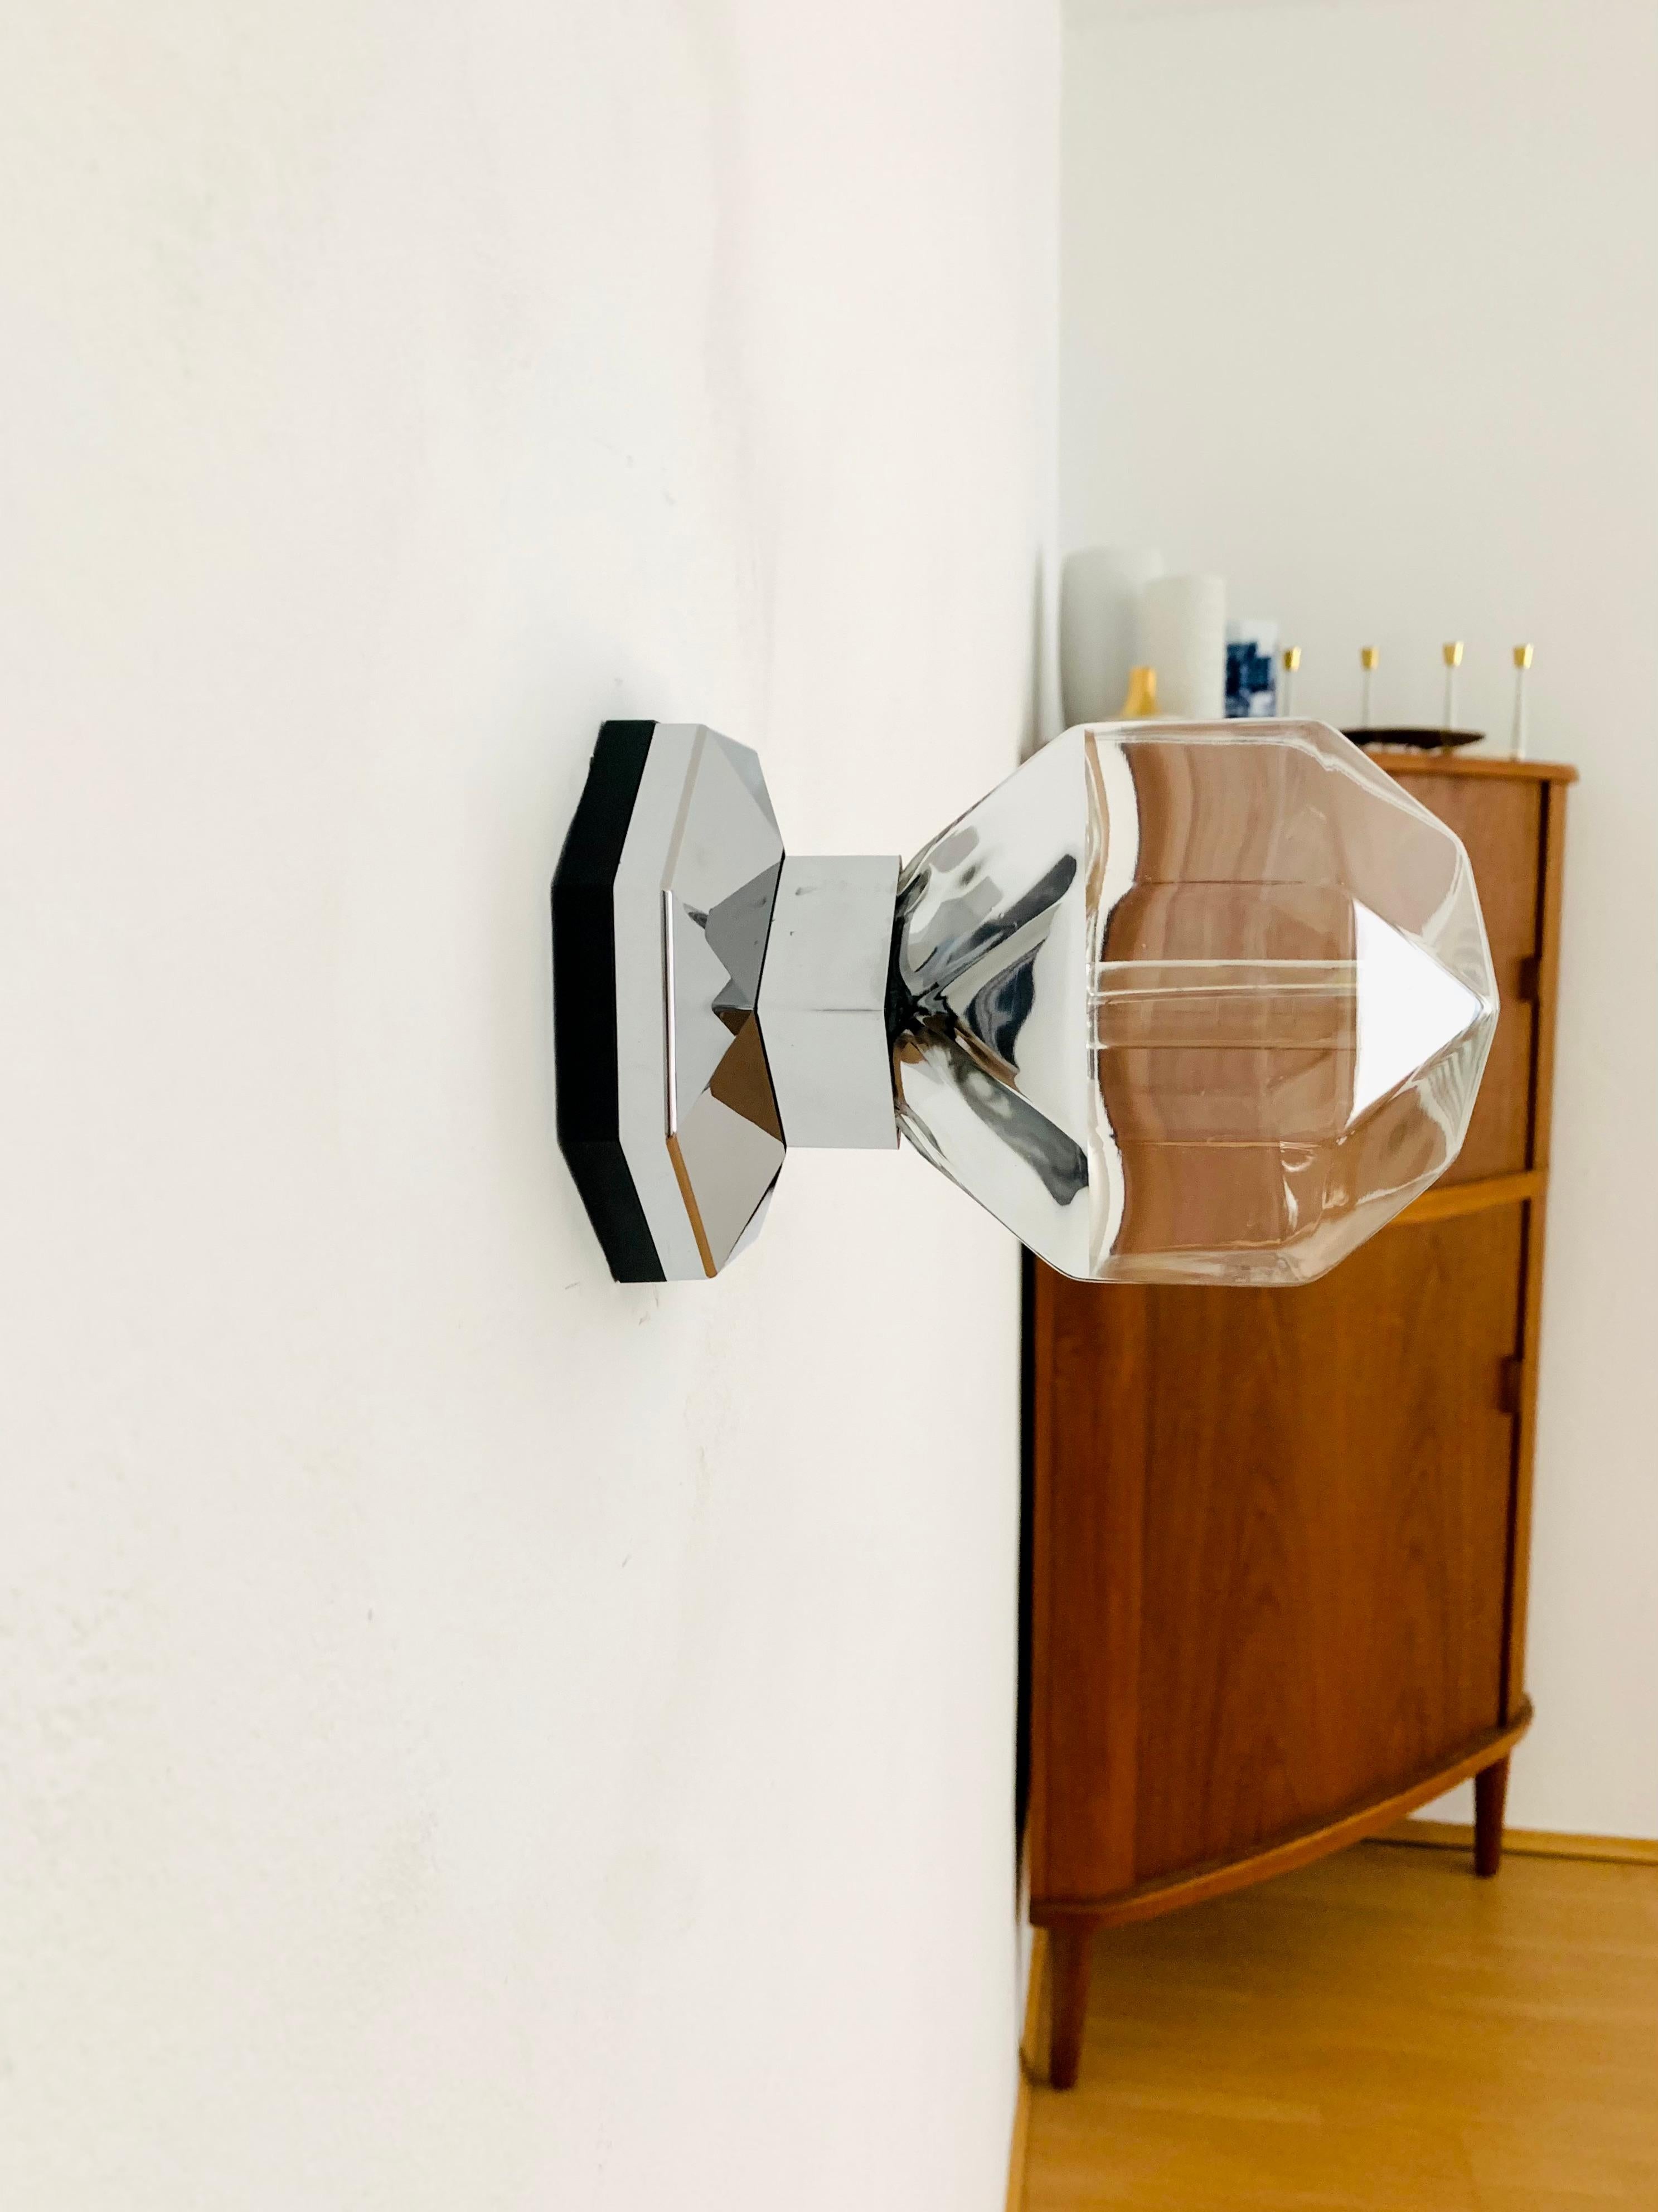 1970s Modernist Modular Wall or Ceiling Lamp by Motoko Ishii for Staff In Good Condition For Sale In München, DE